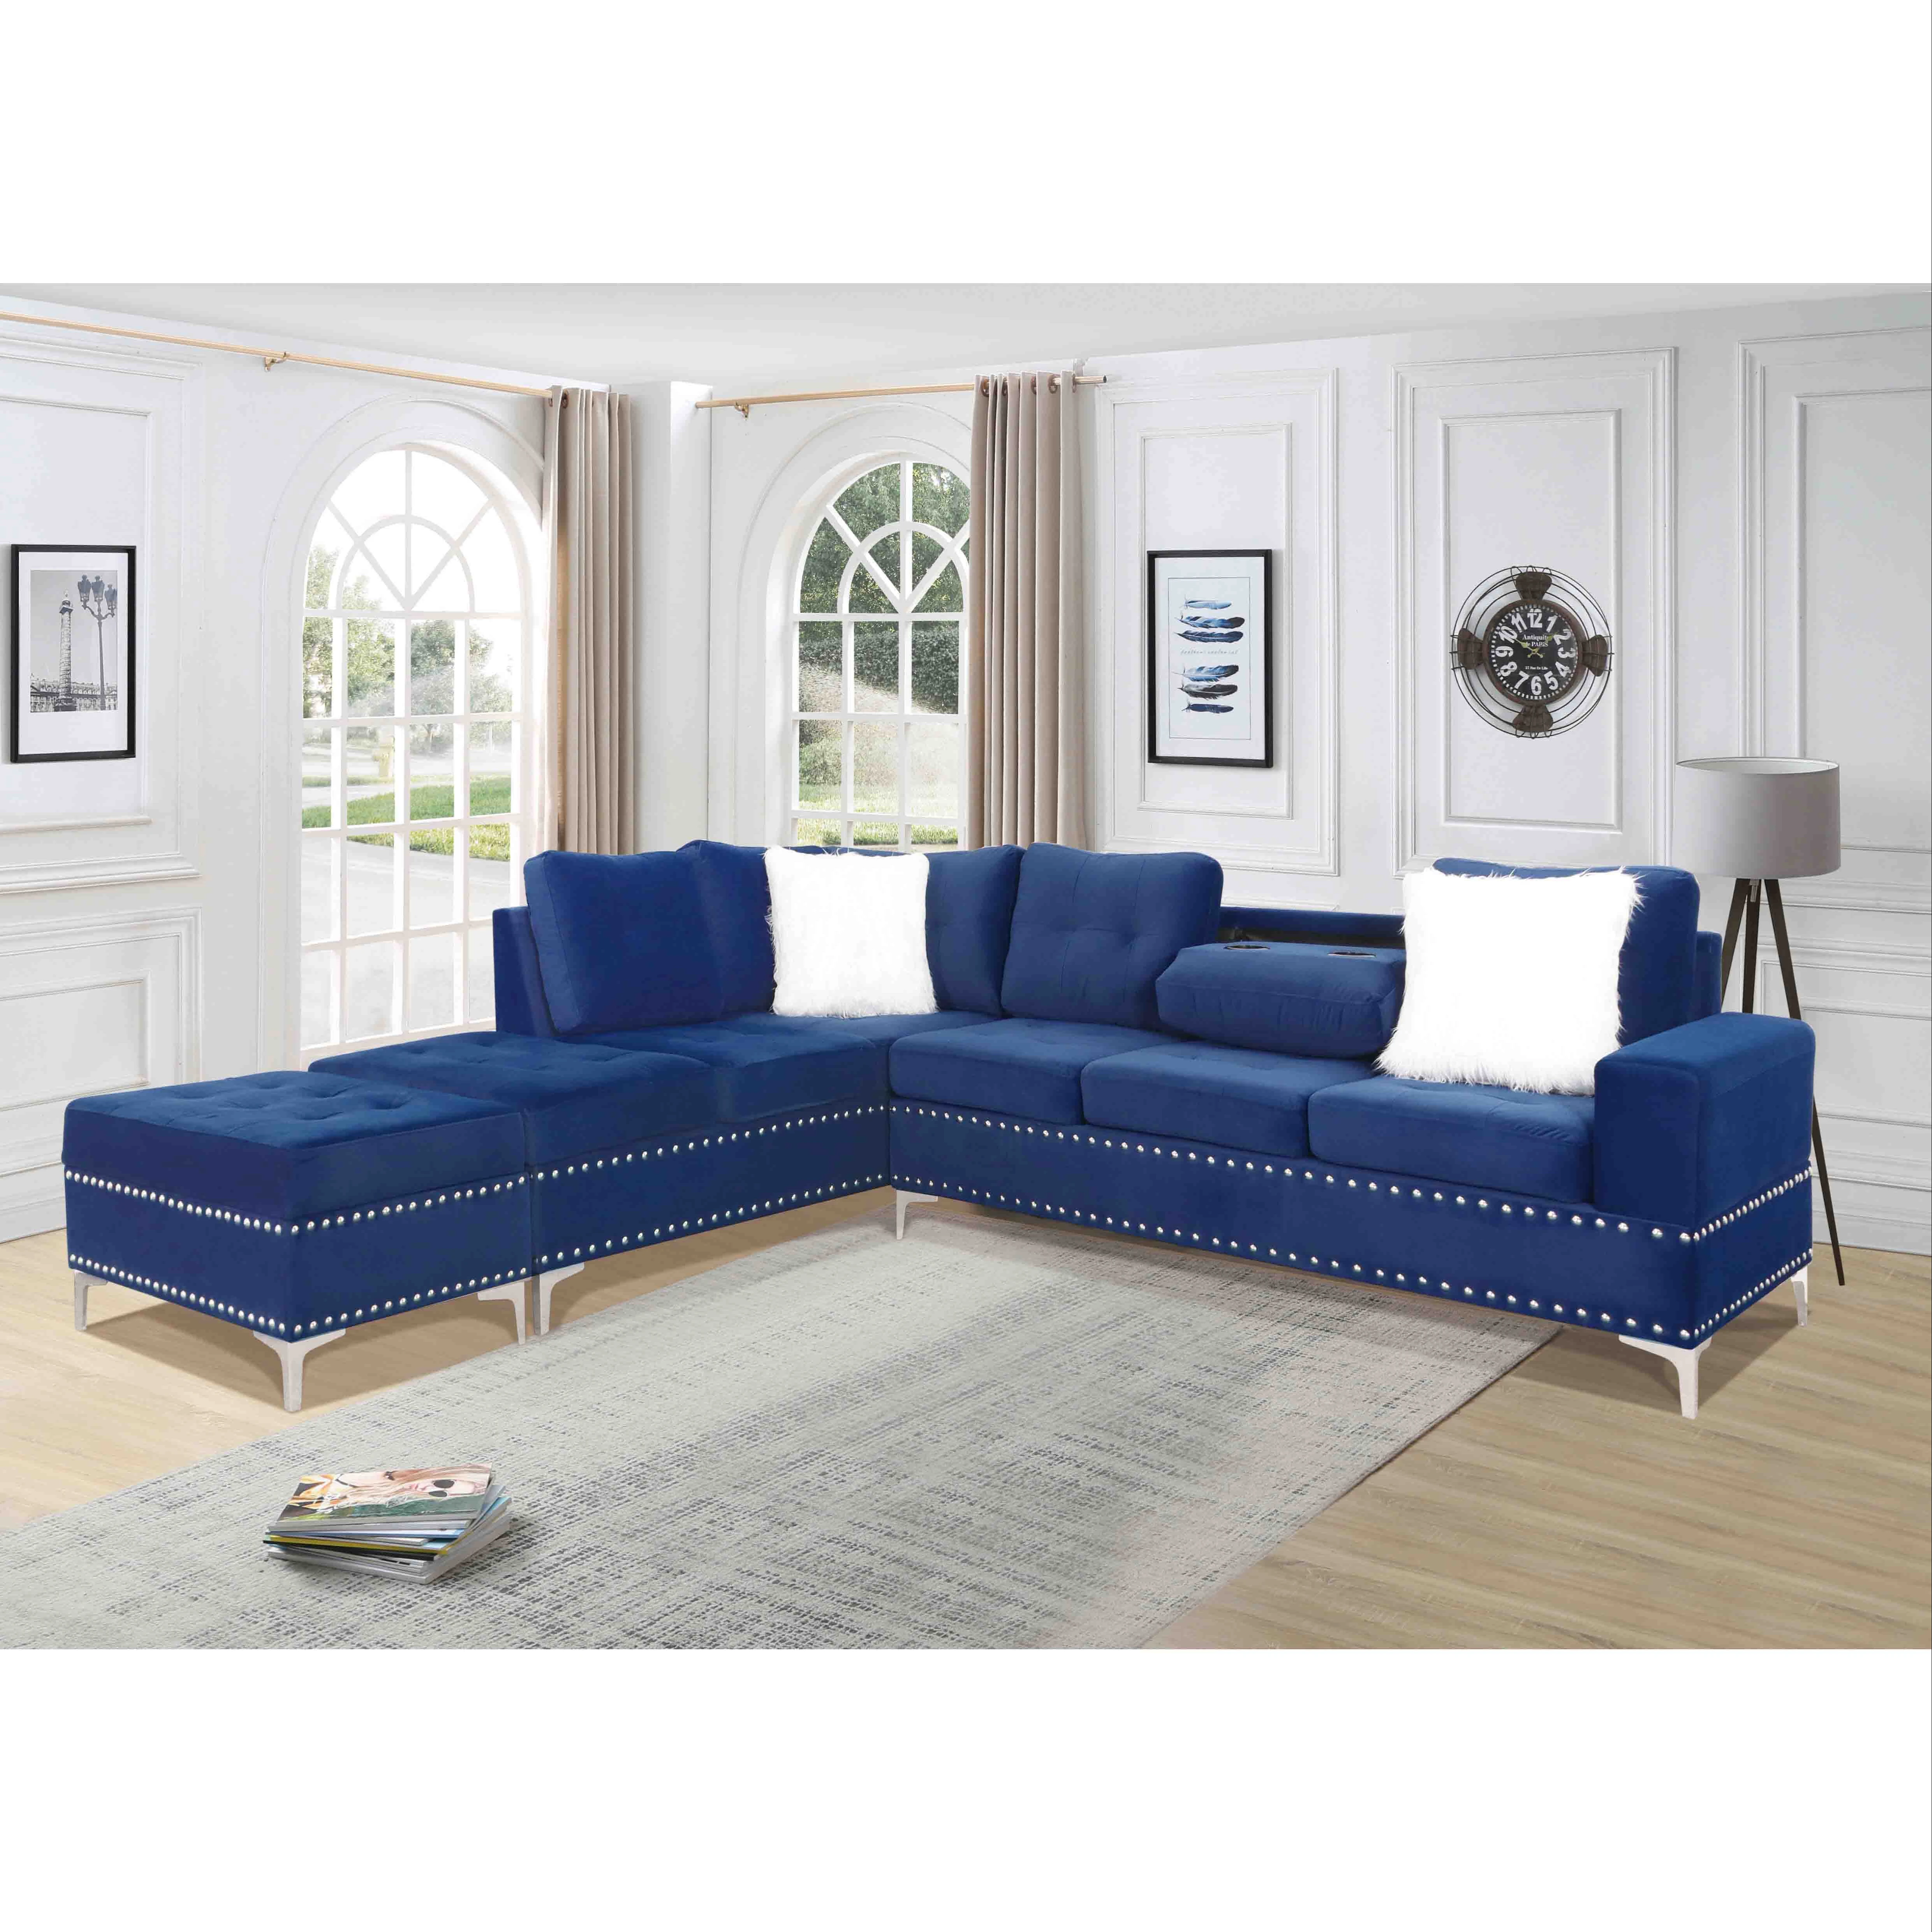 DFS Emperor Sofa  Leather settees, Settee sofa, Leather couch